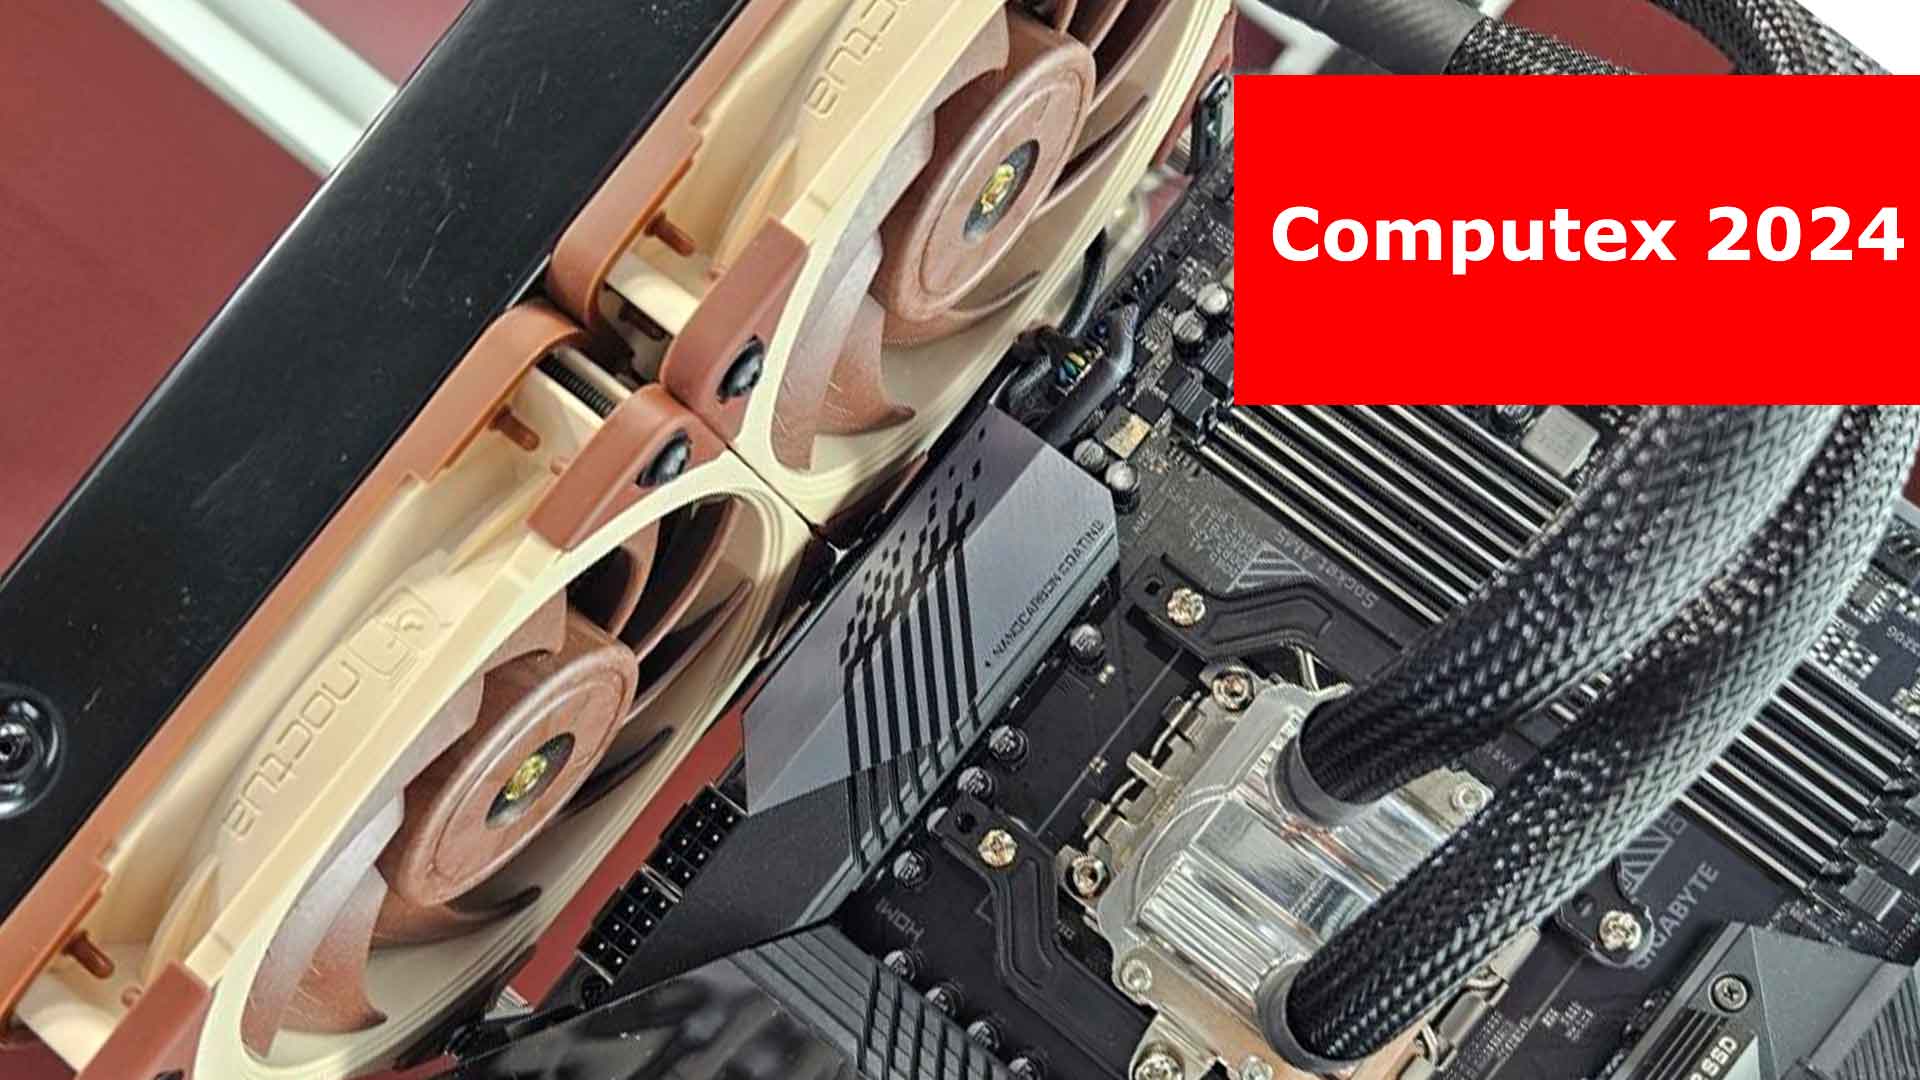 Watercooling AIO Noctua – Thermosiphon development project